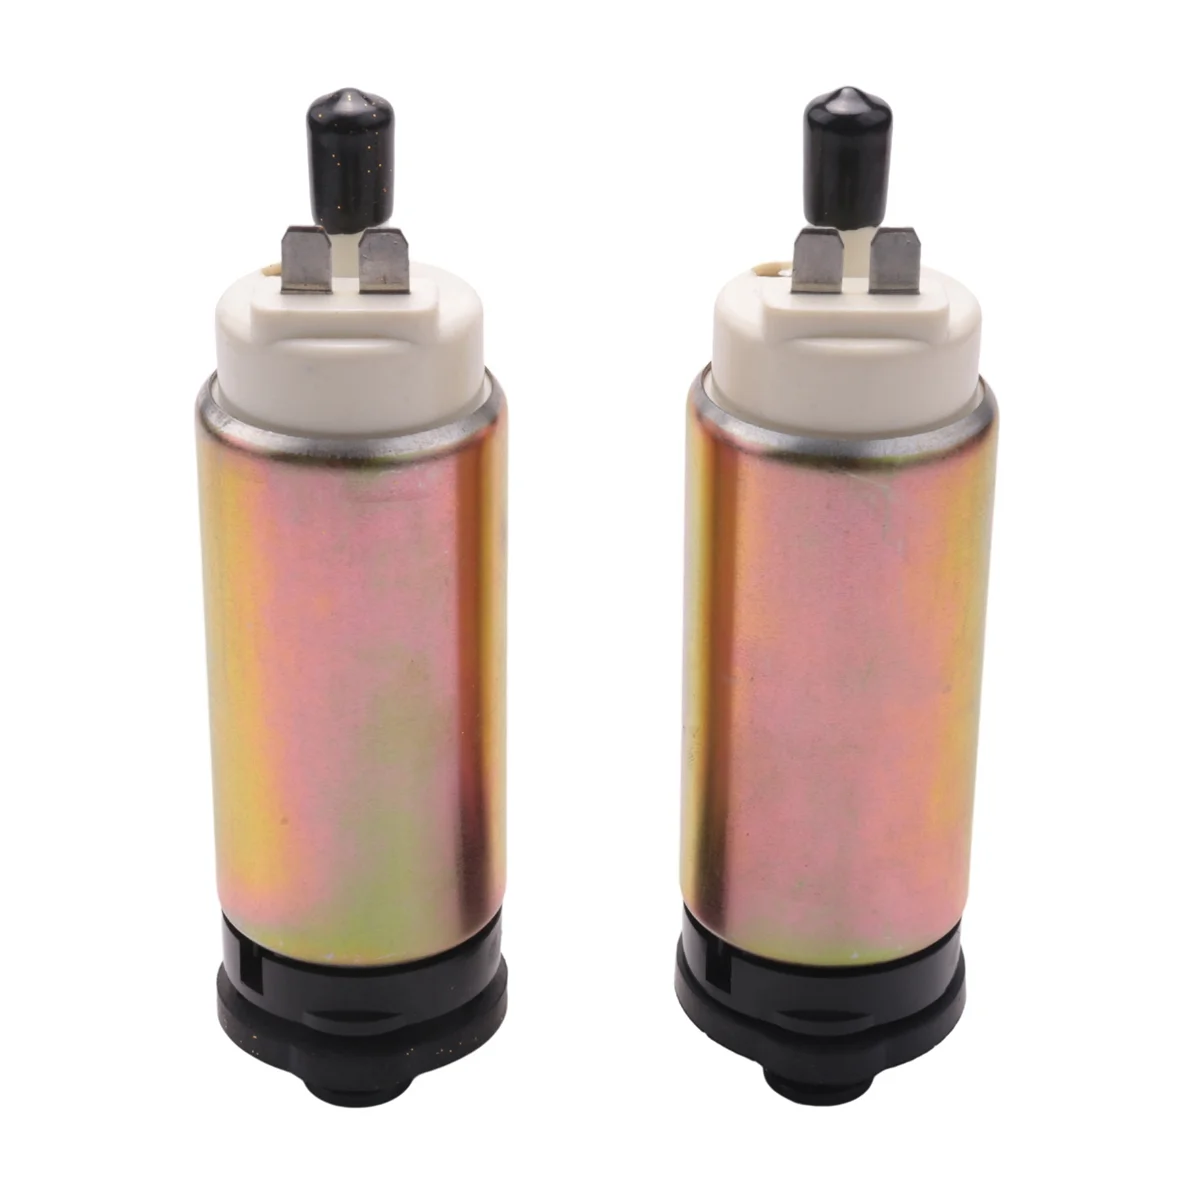 

2Pcs Outboard Fuel Pump for Mercury Marine Mercruiser 4-Stroke 20HP 30HP 40HP 50HP 60HP Replaces 898101T67 892267A51